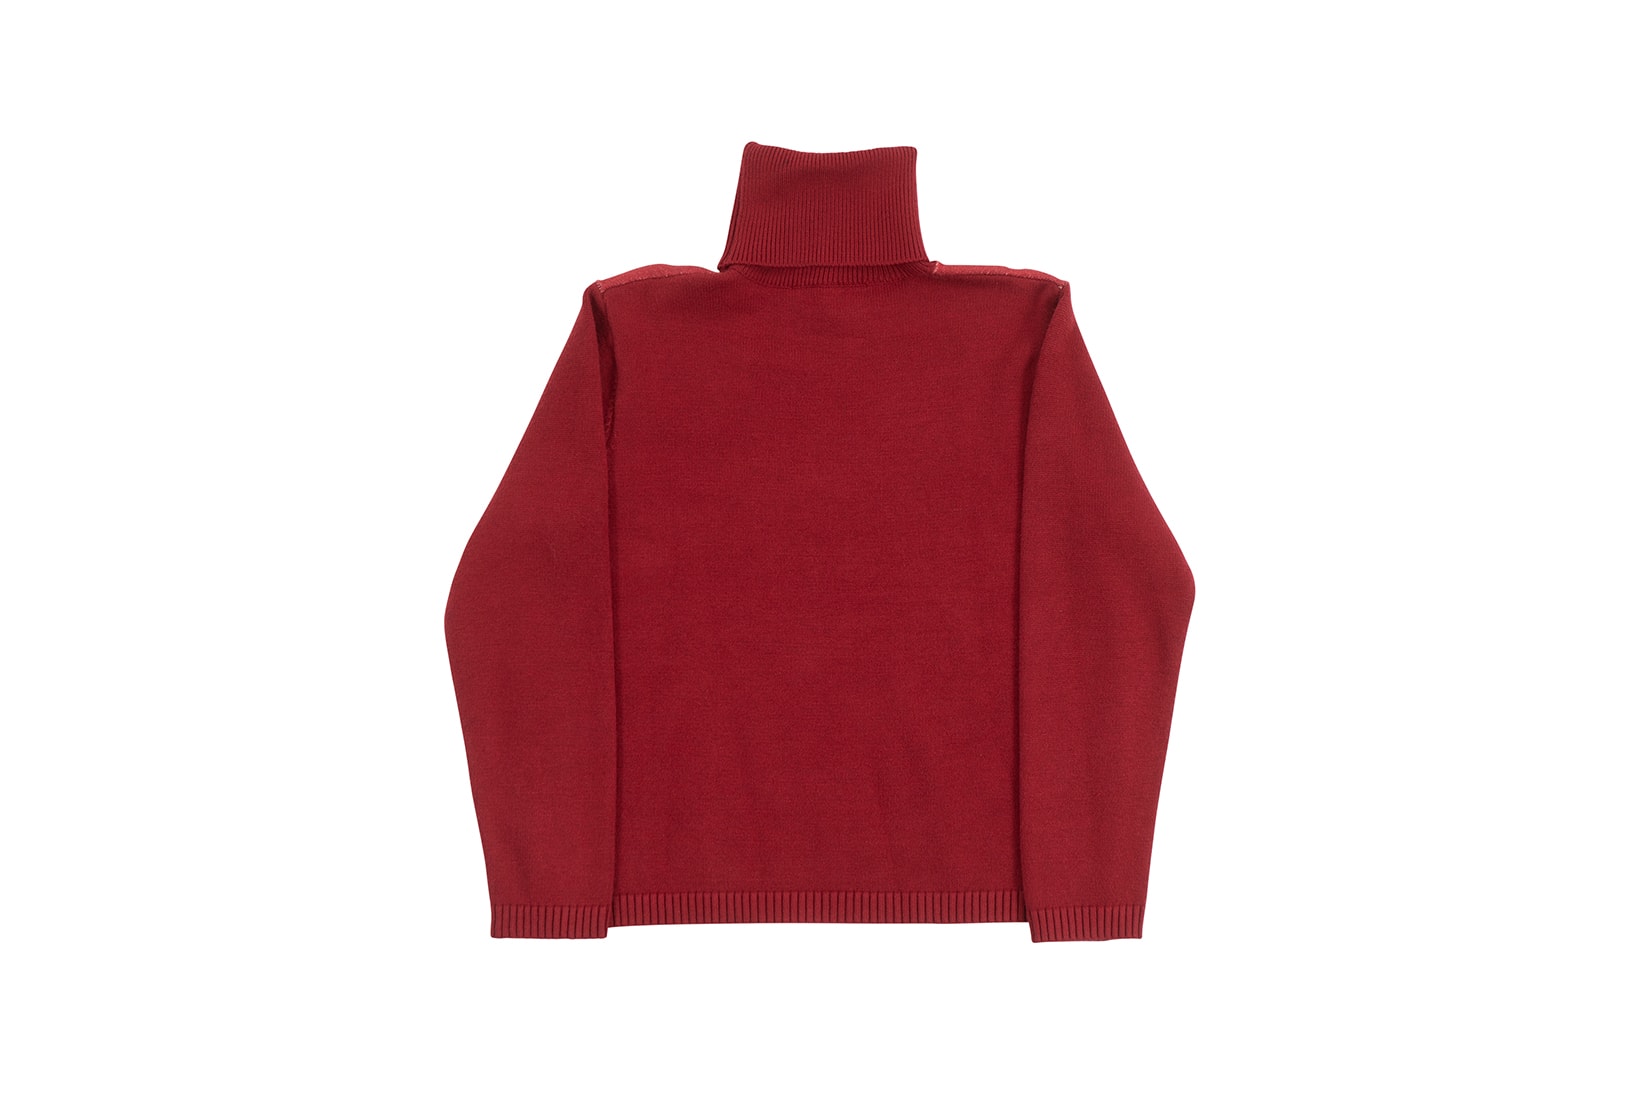 tier project 3 joy to the world collection sweater turtleneck outerwear maroon red back